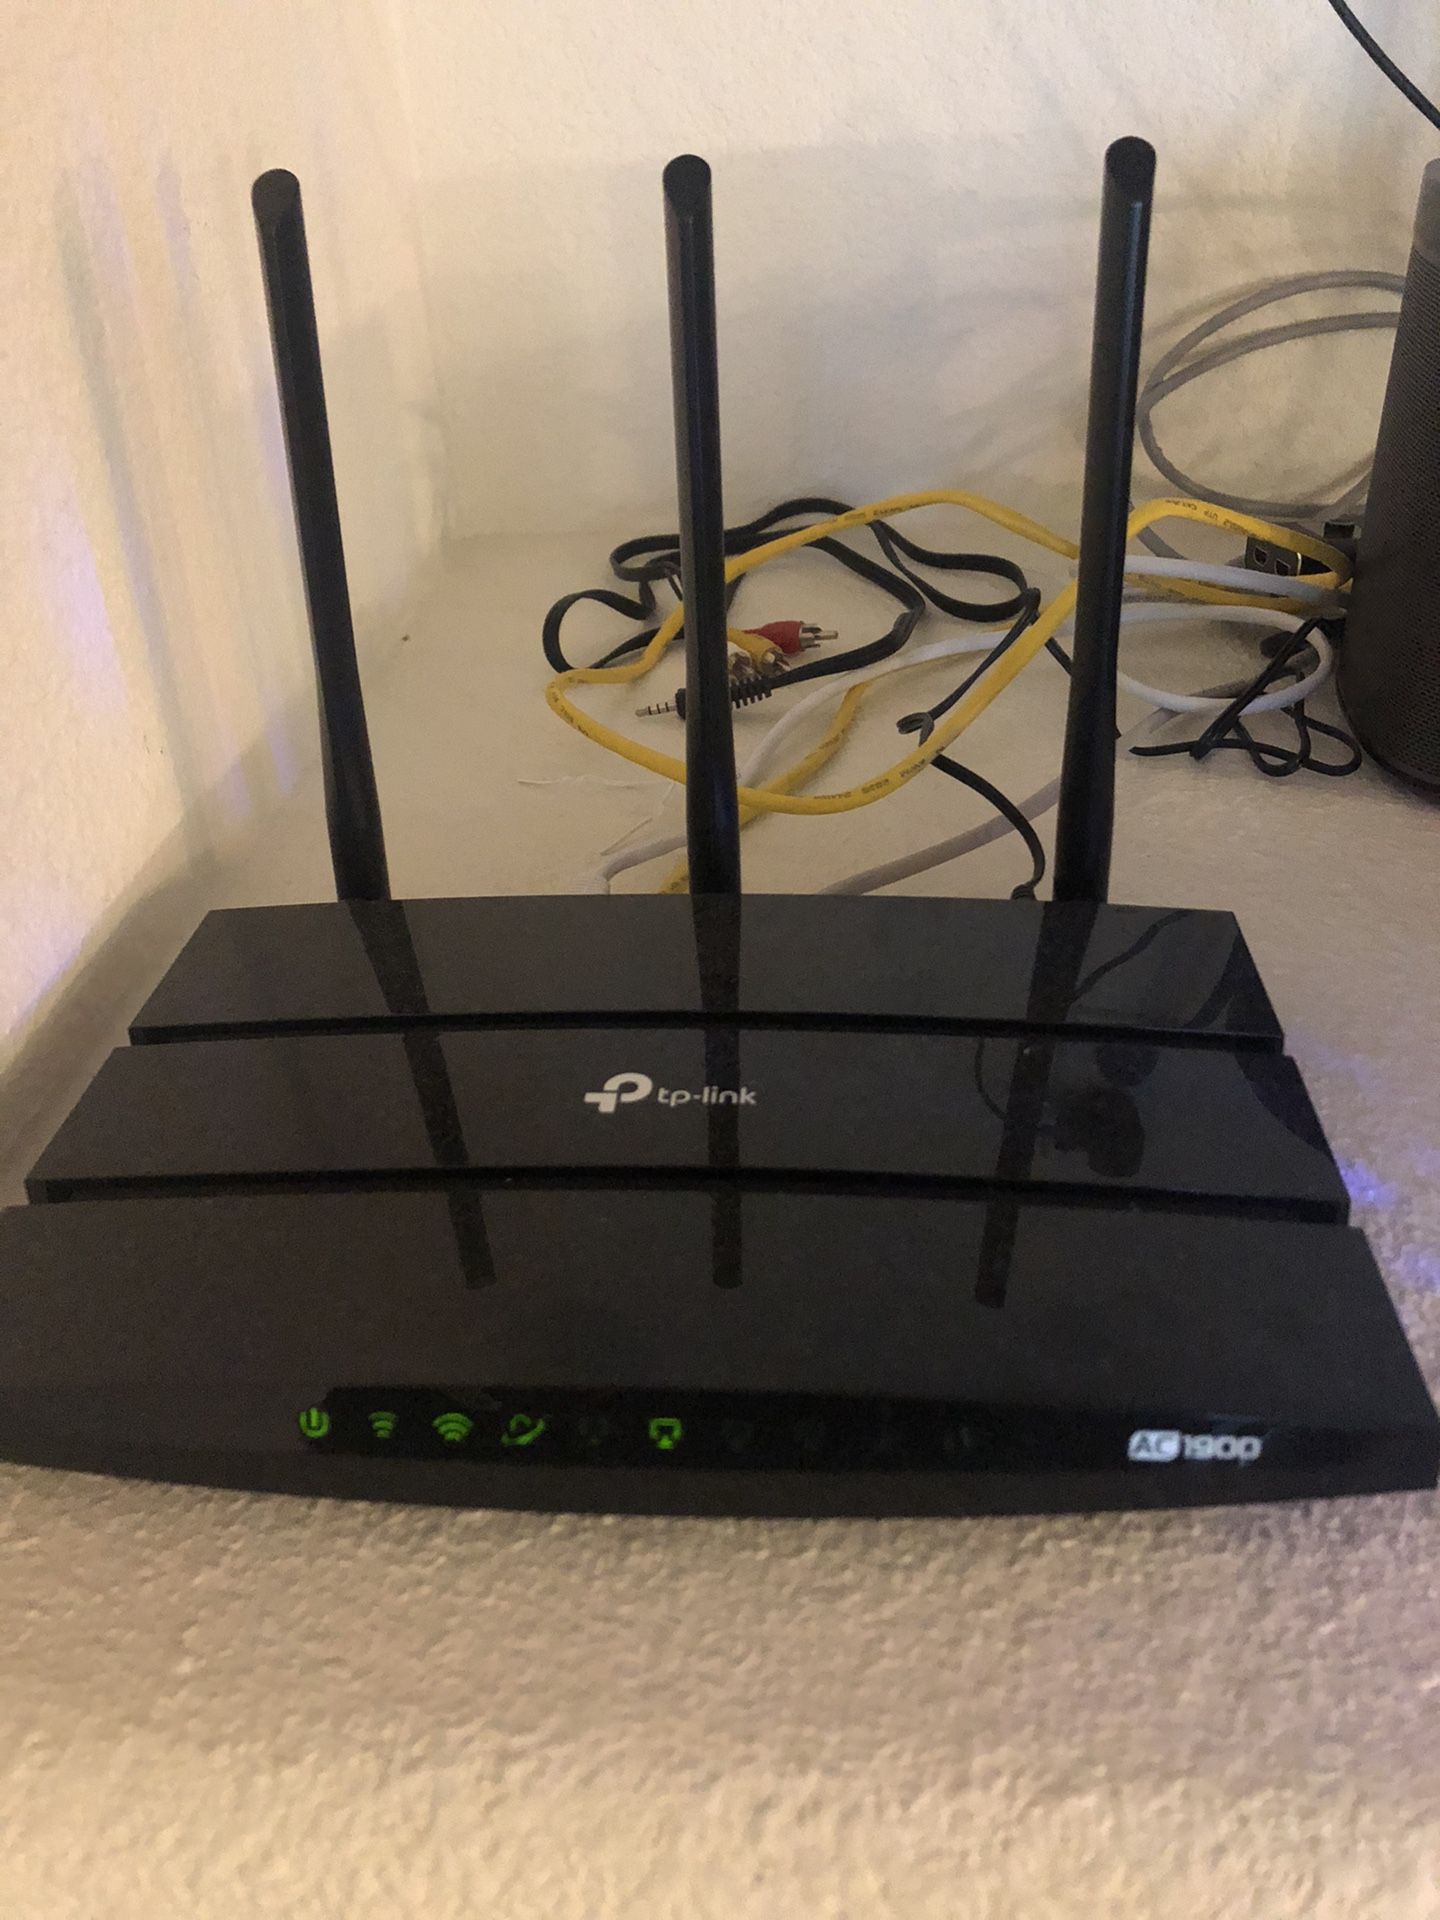 Smart WiFi Router + Cable Modem